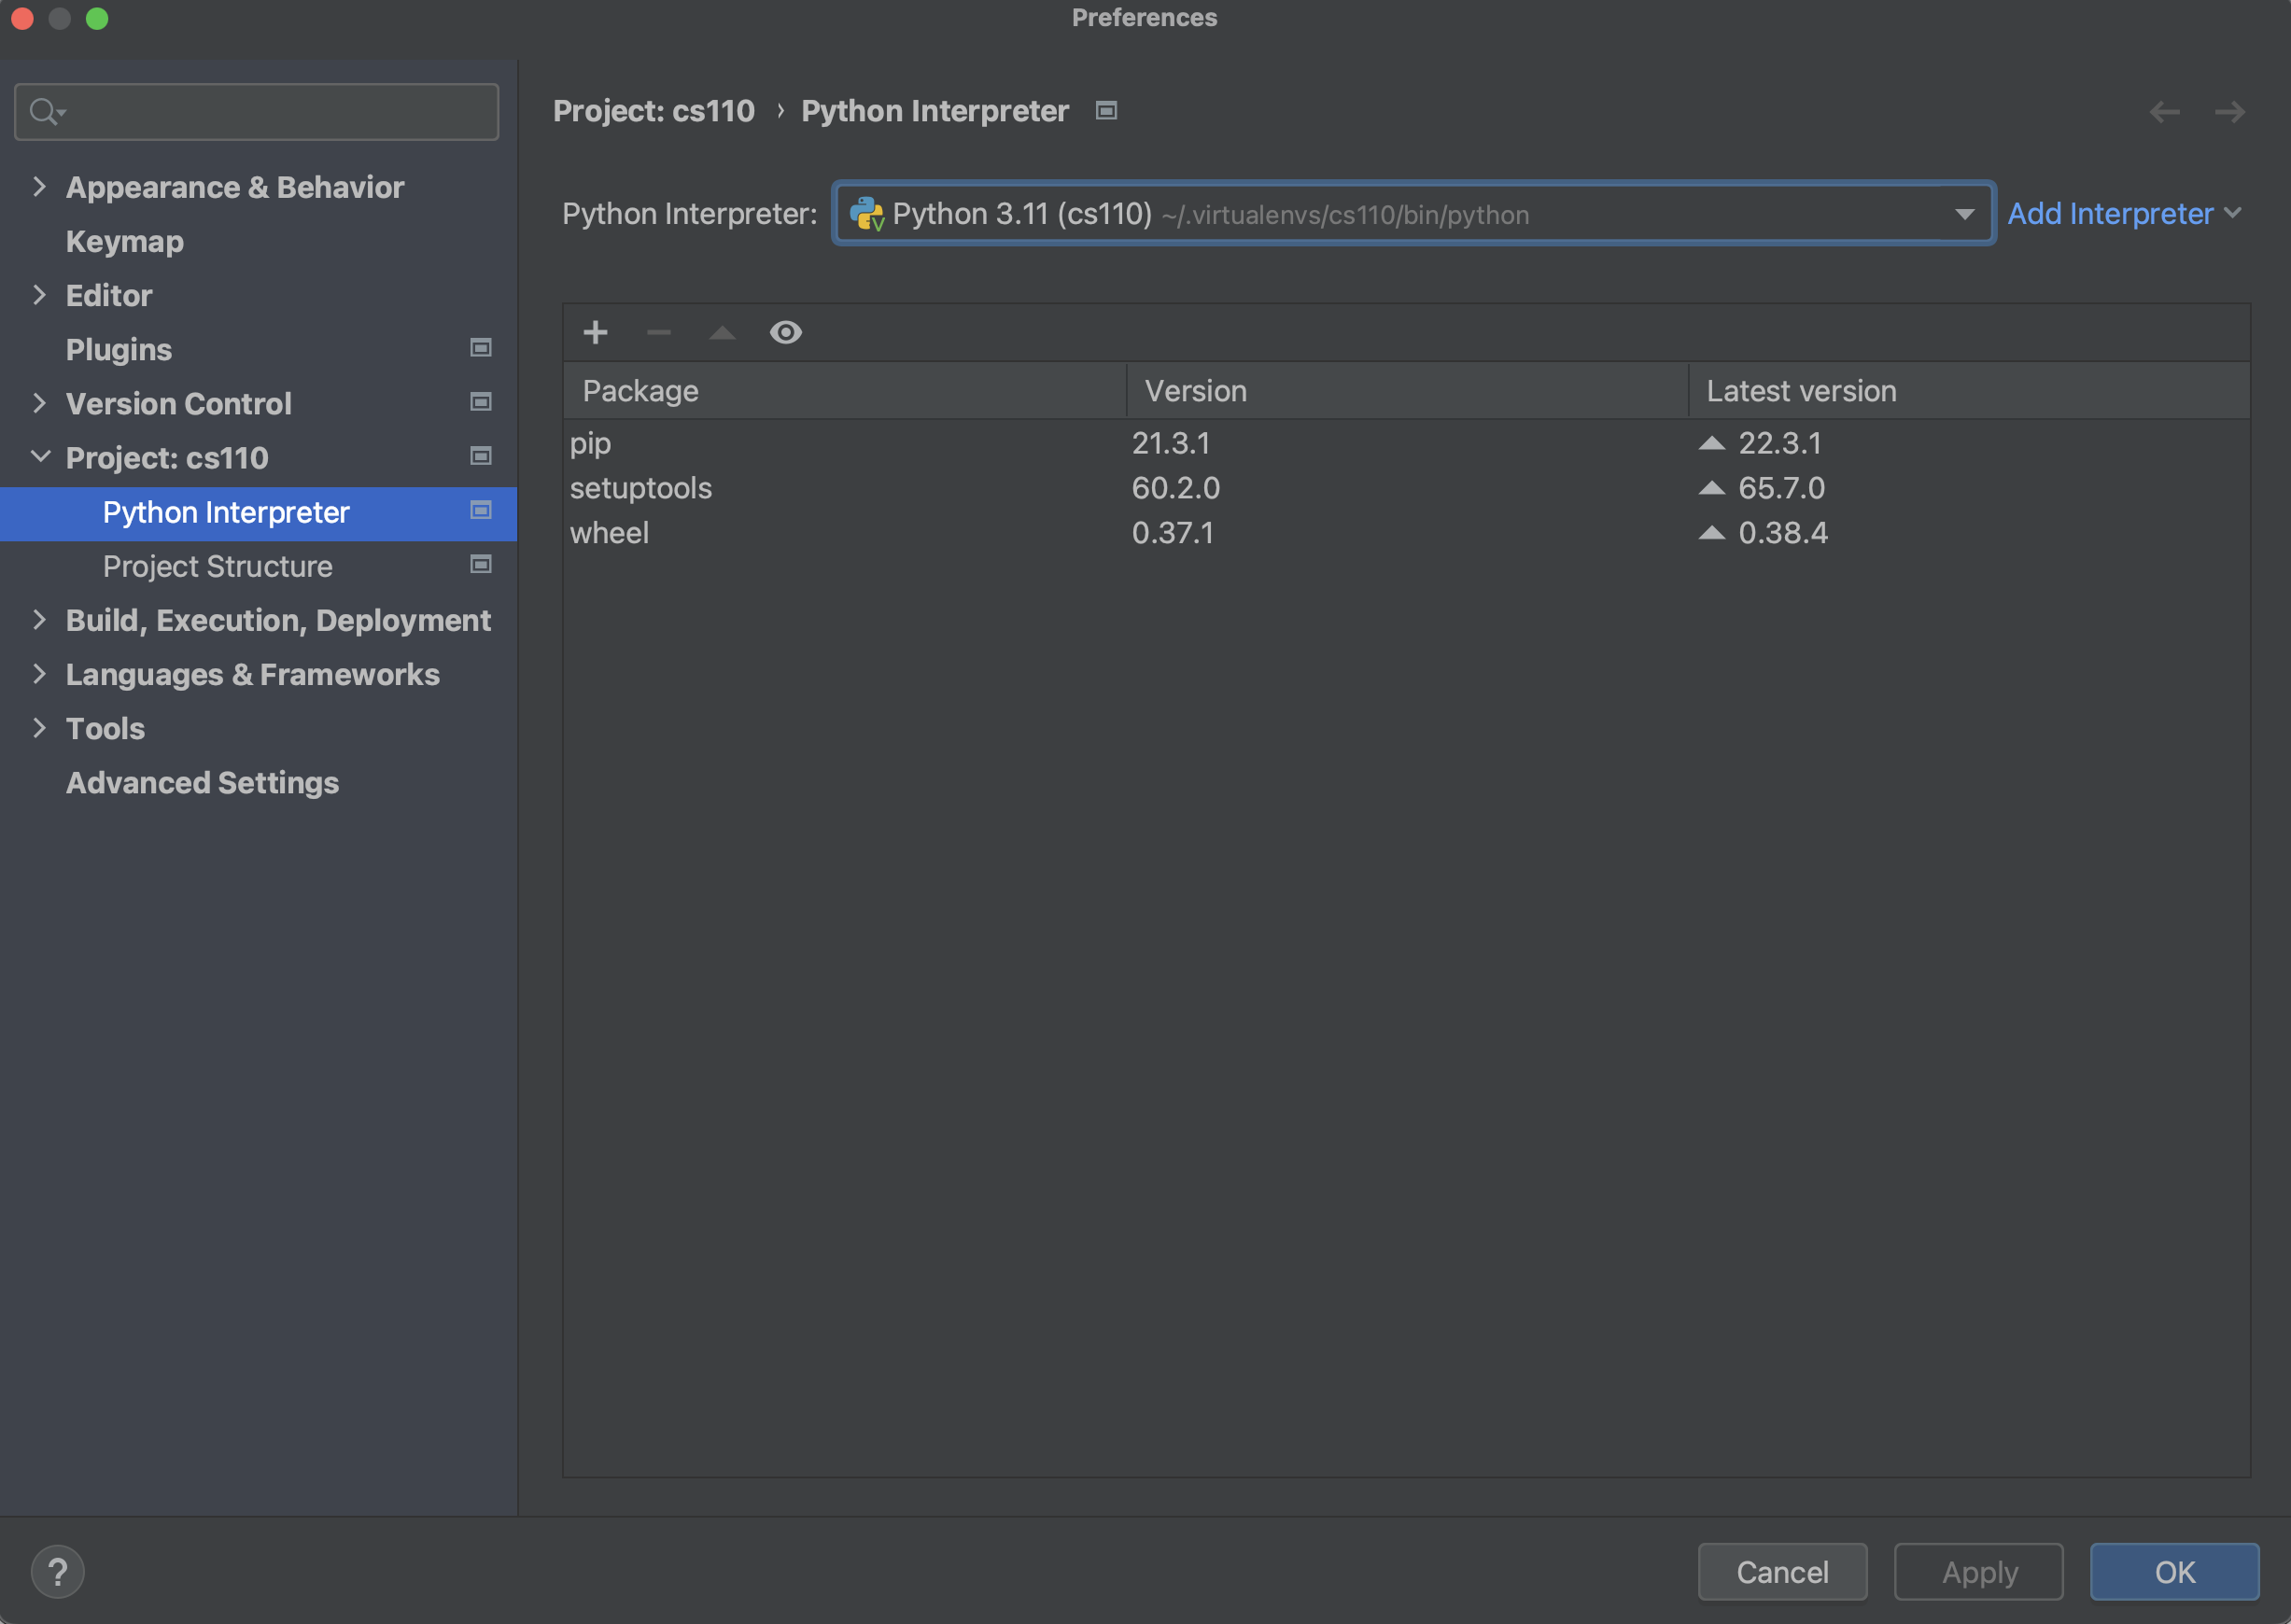 pycharm settings to install packages